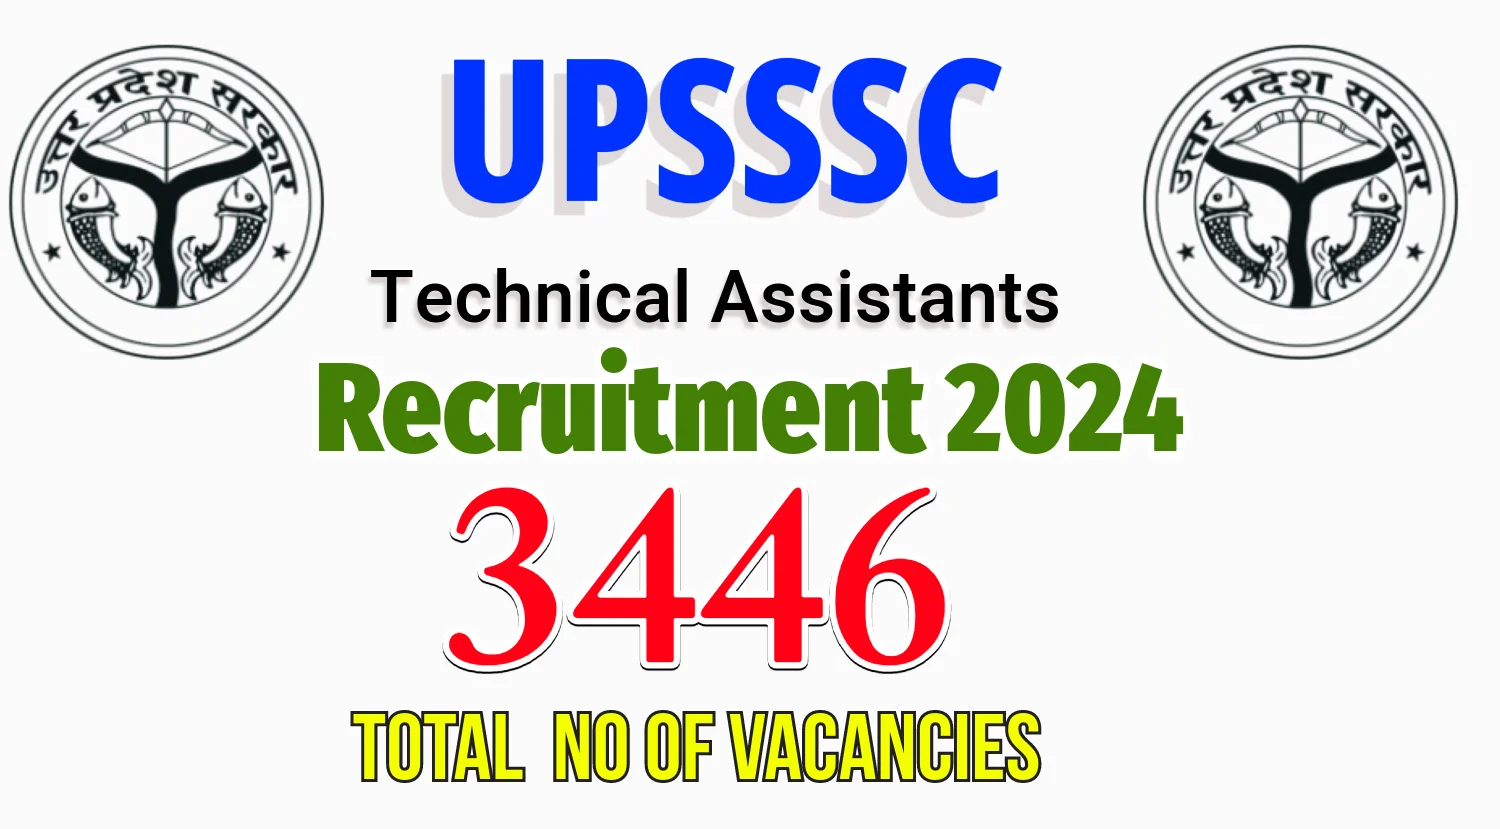 UPSSSC Technical Assistants Recruitment 2024 Notification Out for 3446 Vacancies